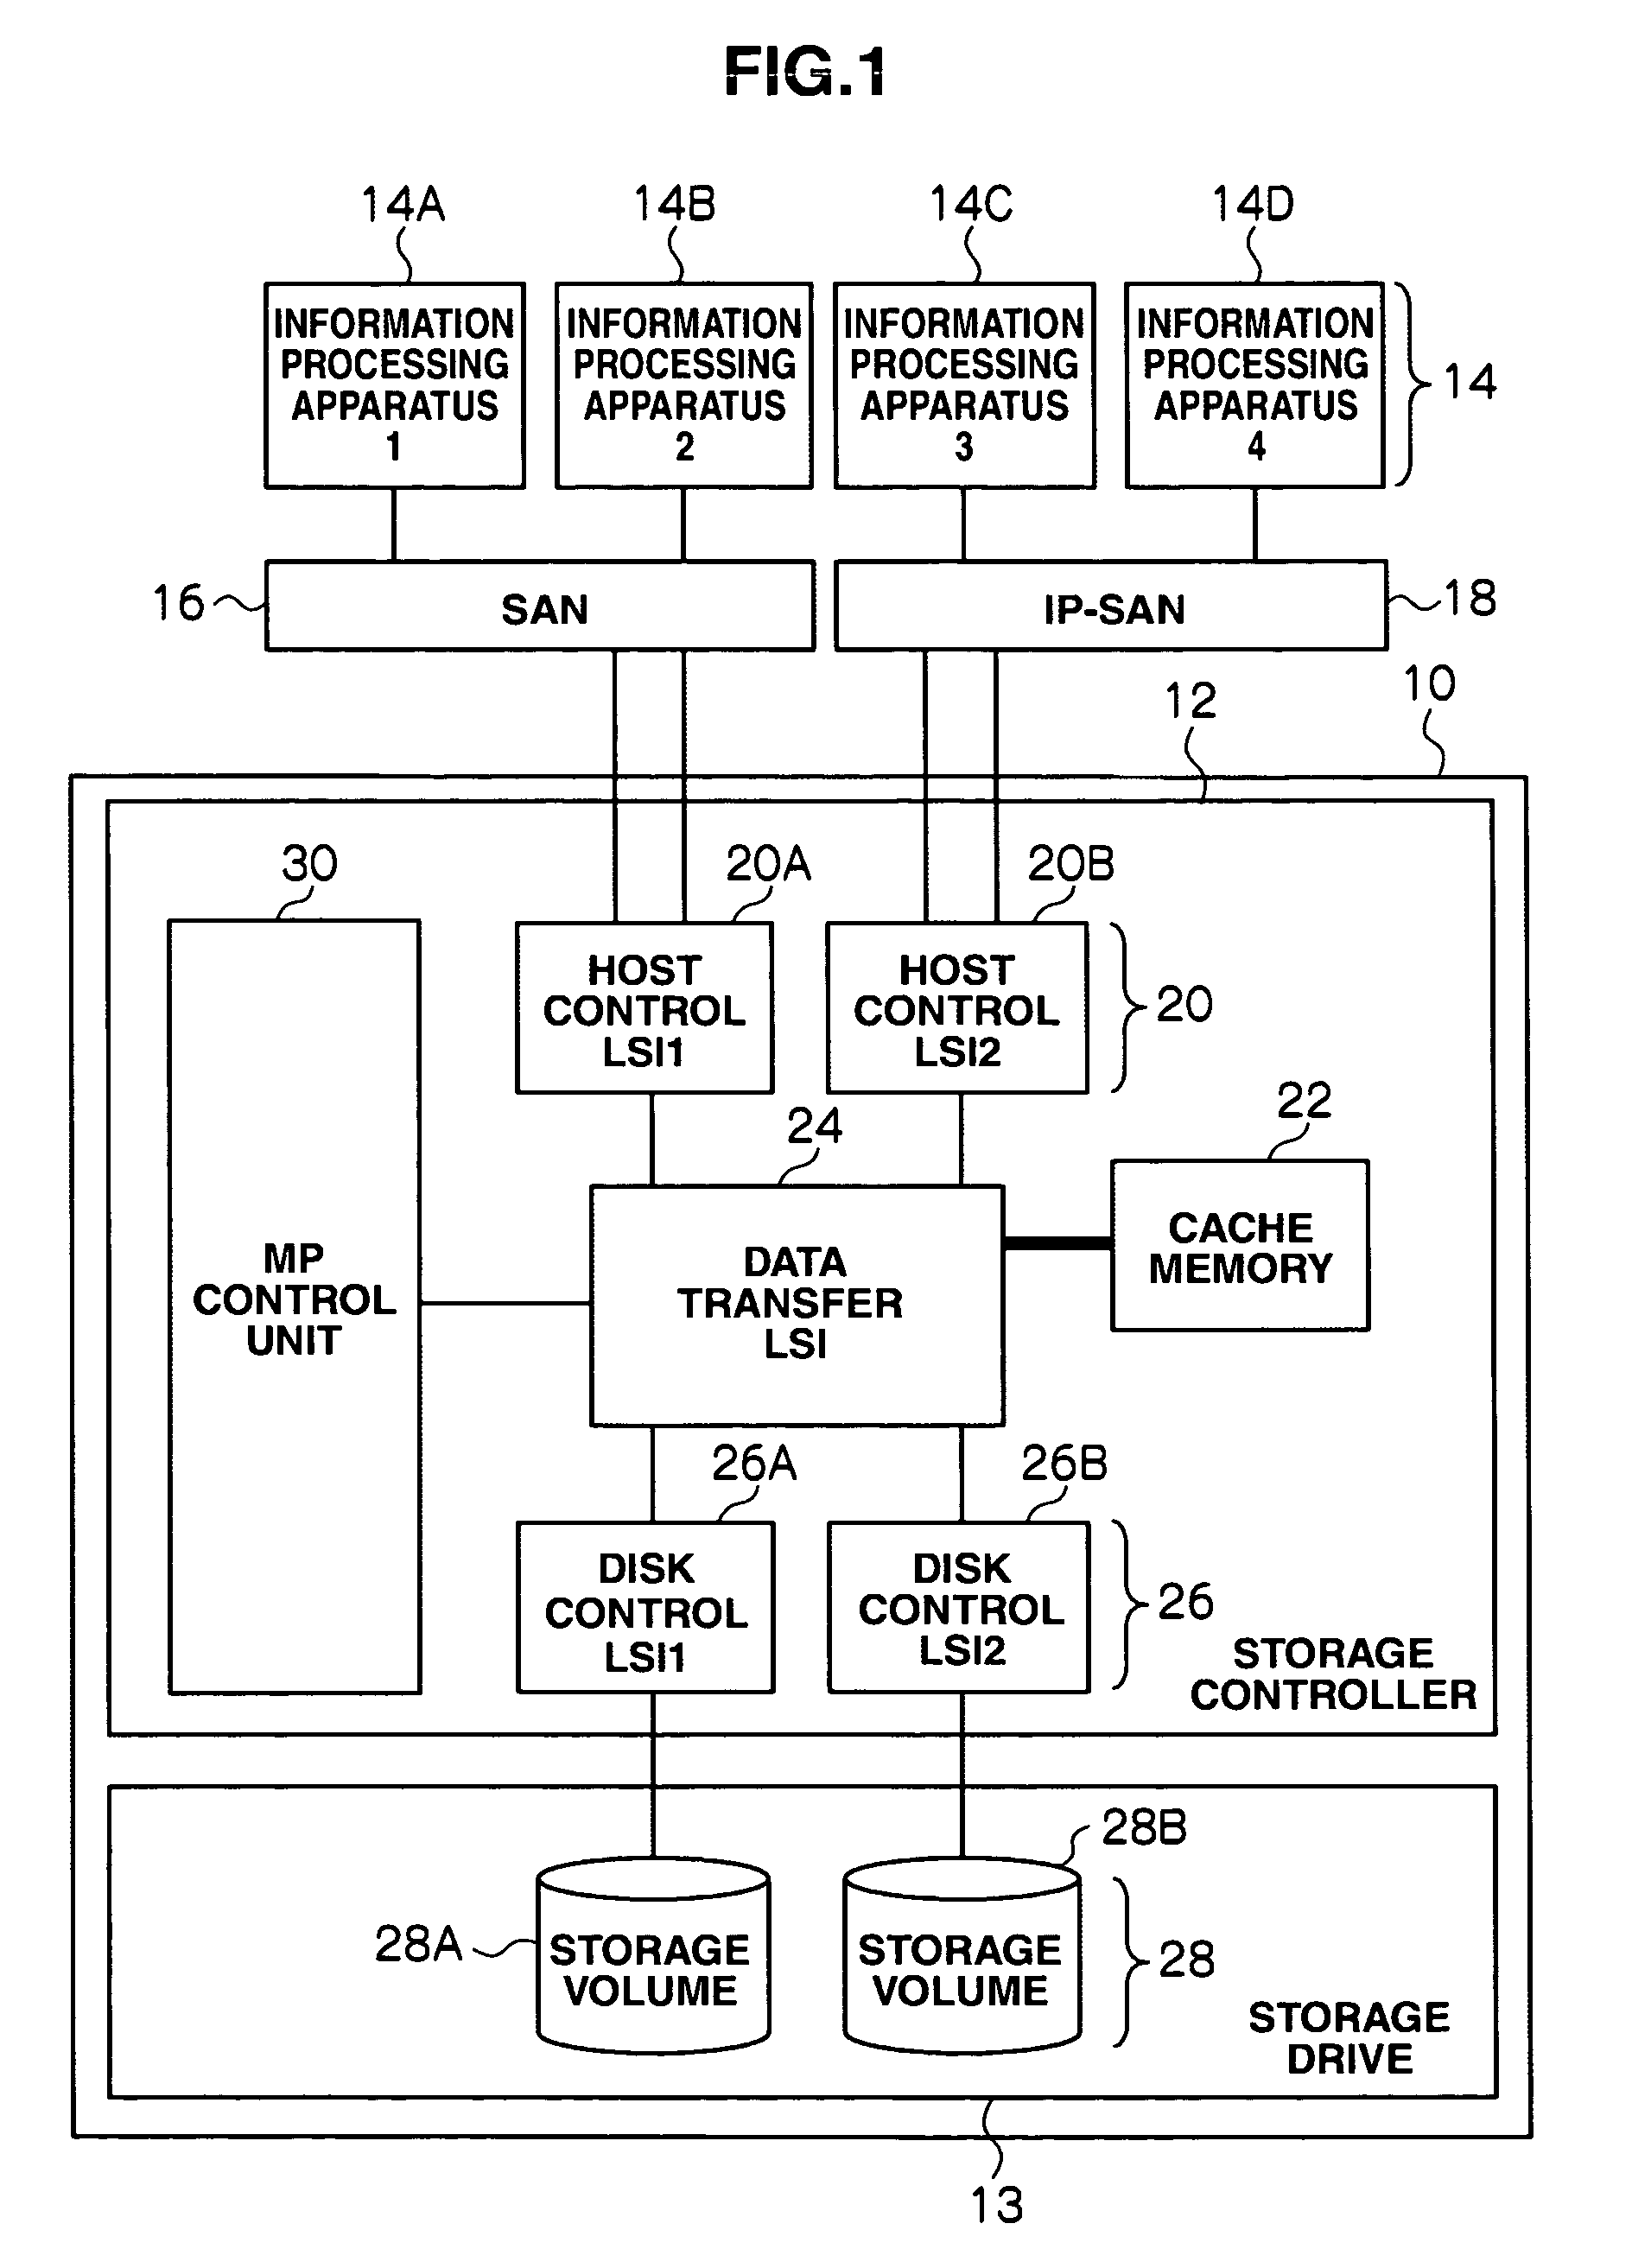 Interrupt control system and storage control system using the same